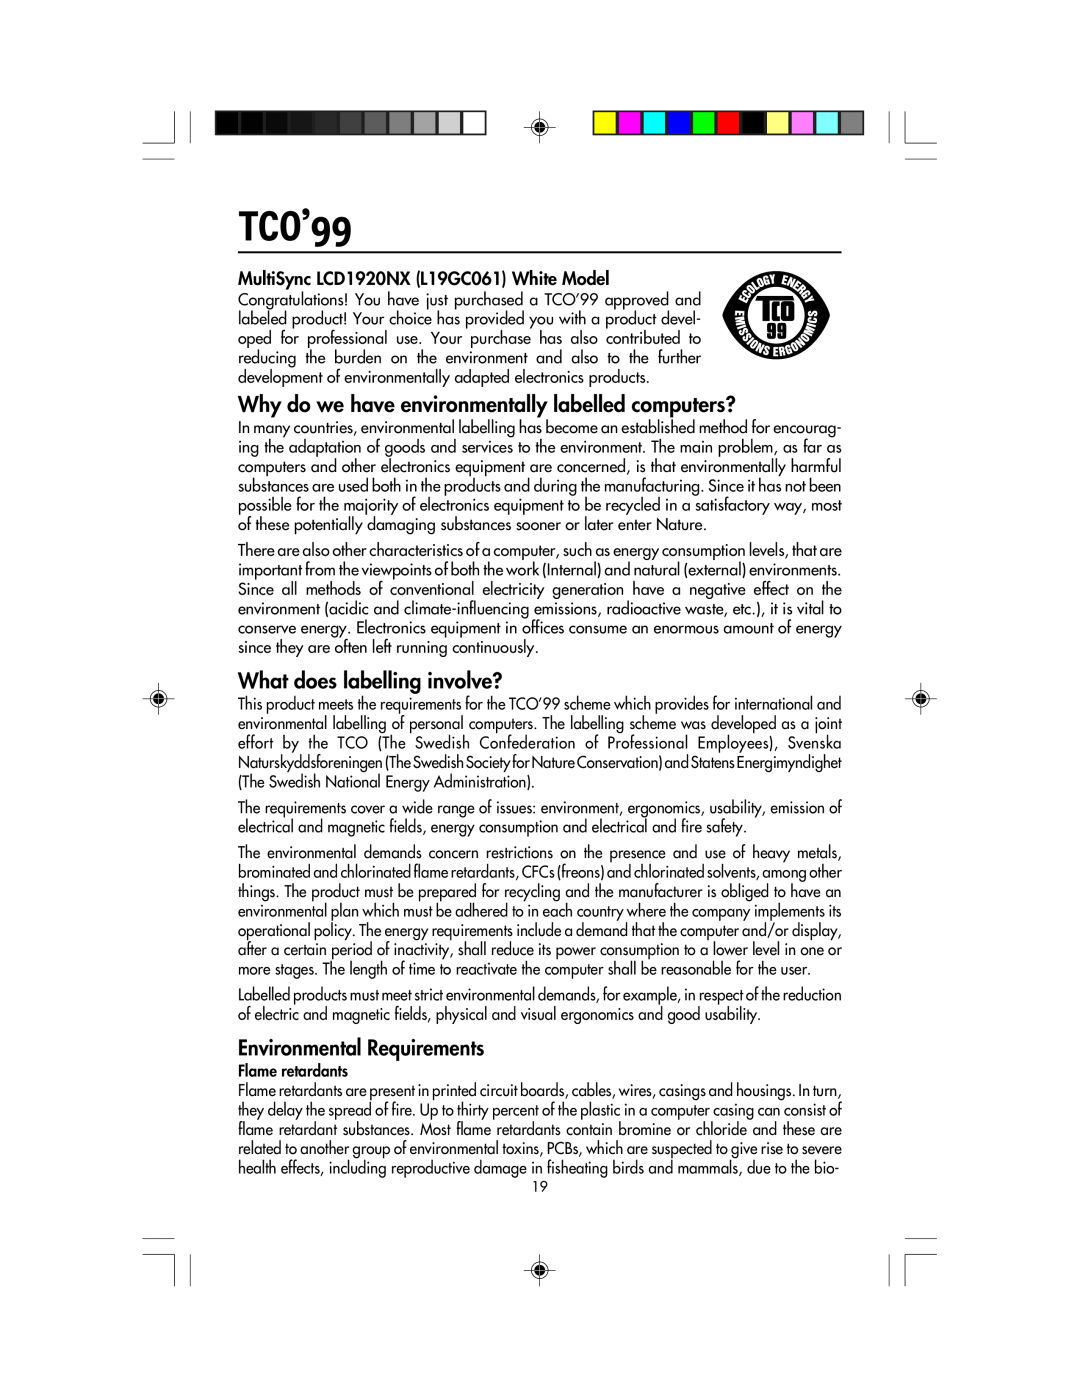 NEC LCD1920NX manual TCO’99, Why do we have environmentally labelled computers?, What does labelling involve? 